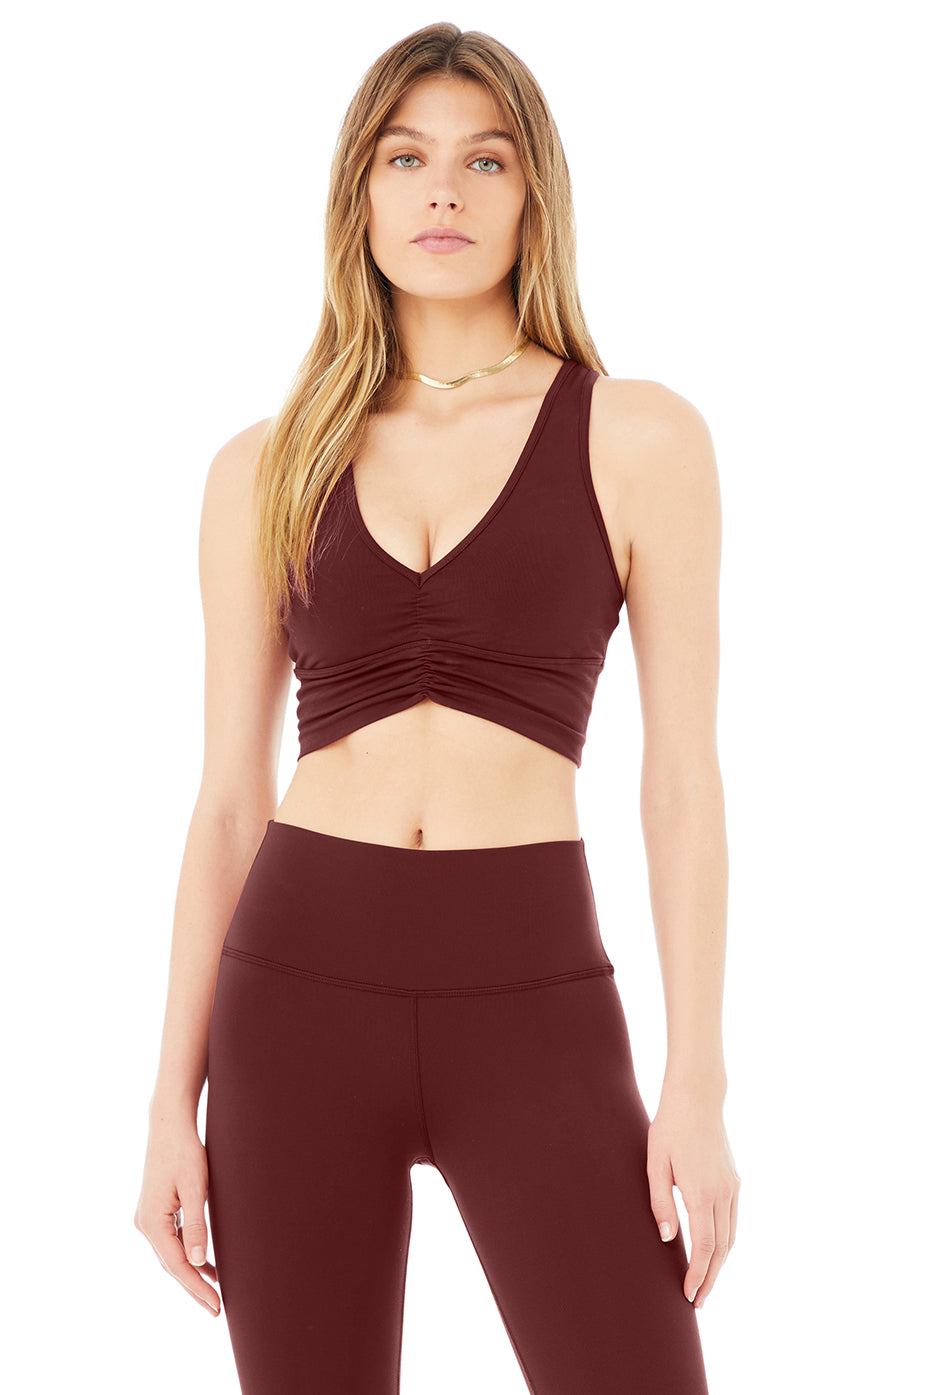 Wild Thing Bra in Cranberry by Alo Yoga